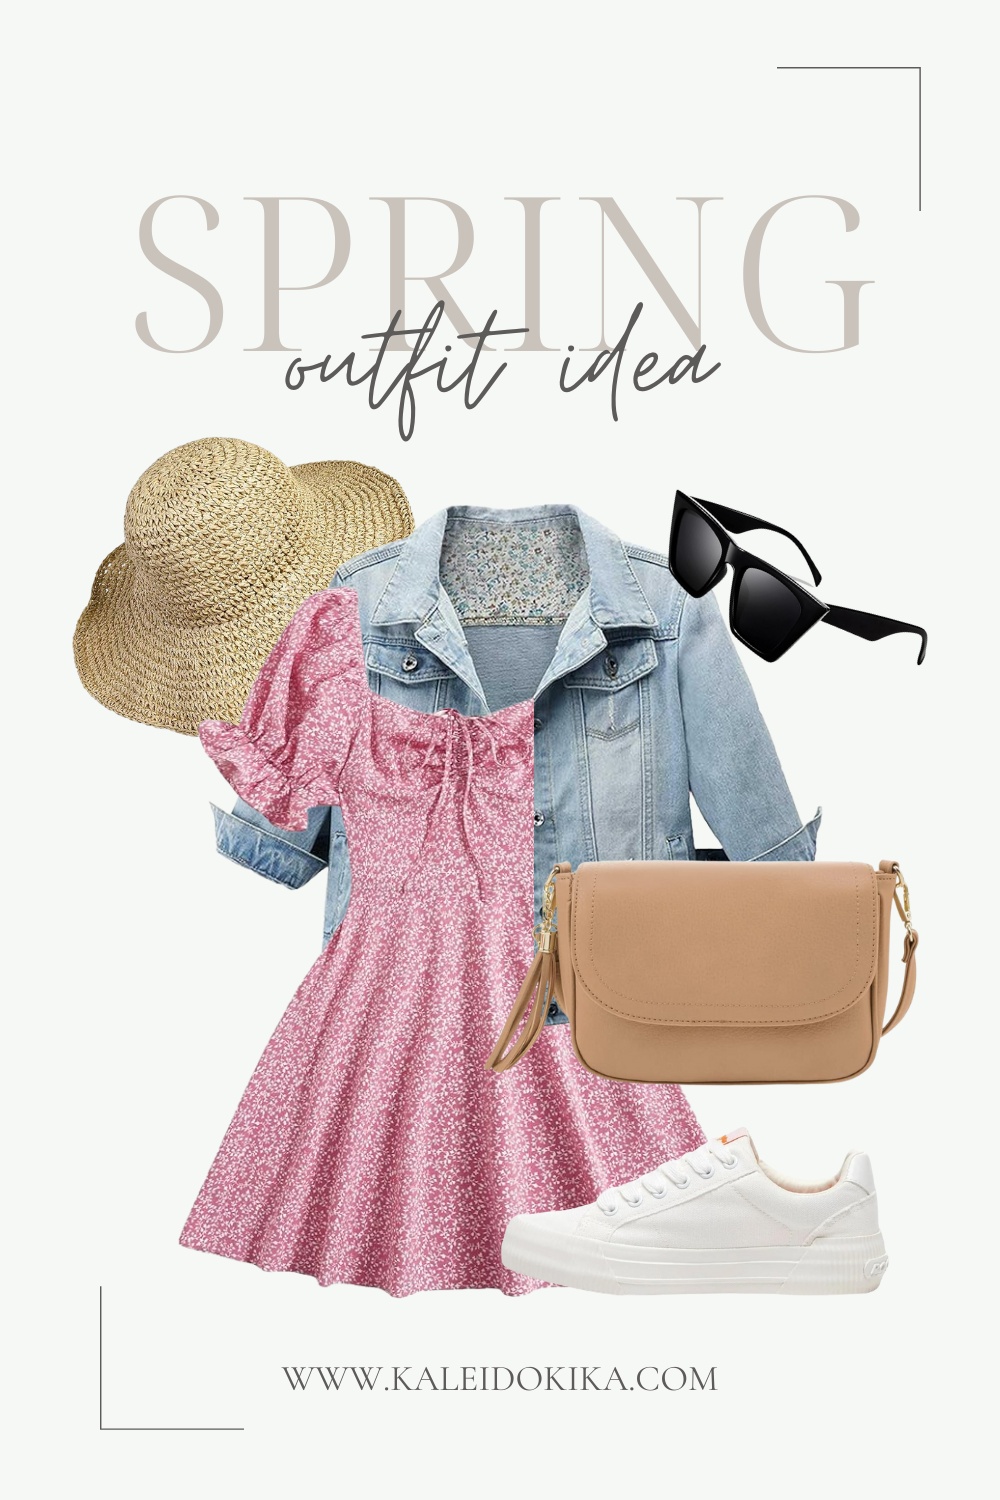 Cute outfit of the day for spring with an adorable floral pink dress and a denim jacket